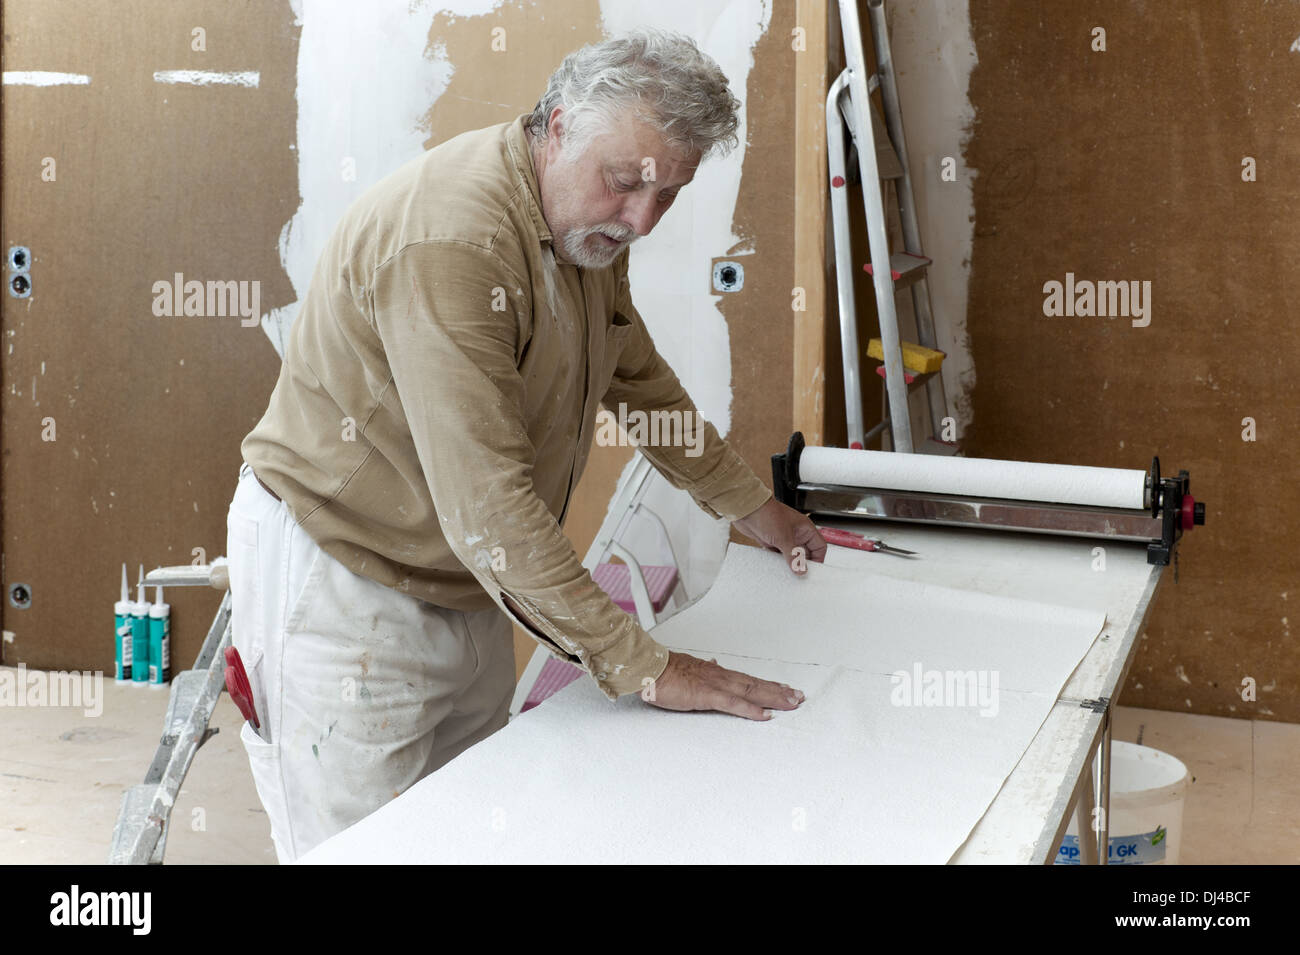 Painters working on a trestle table Stock Photo